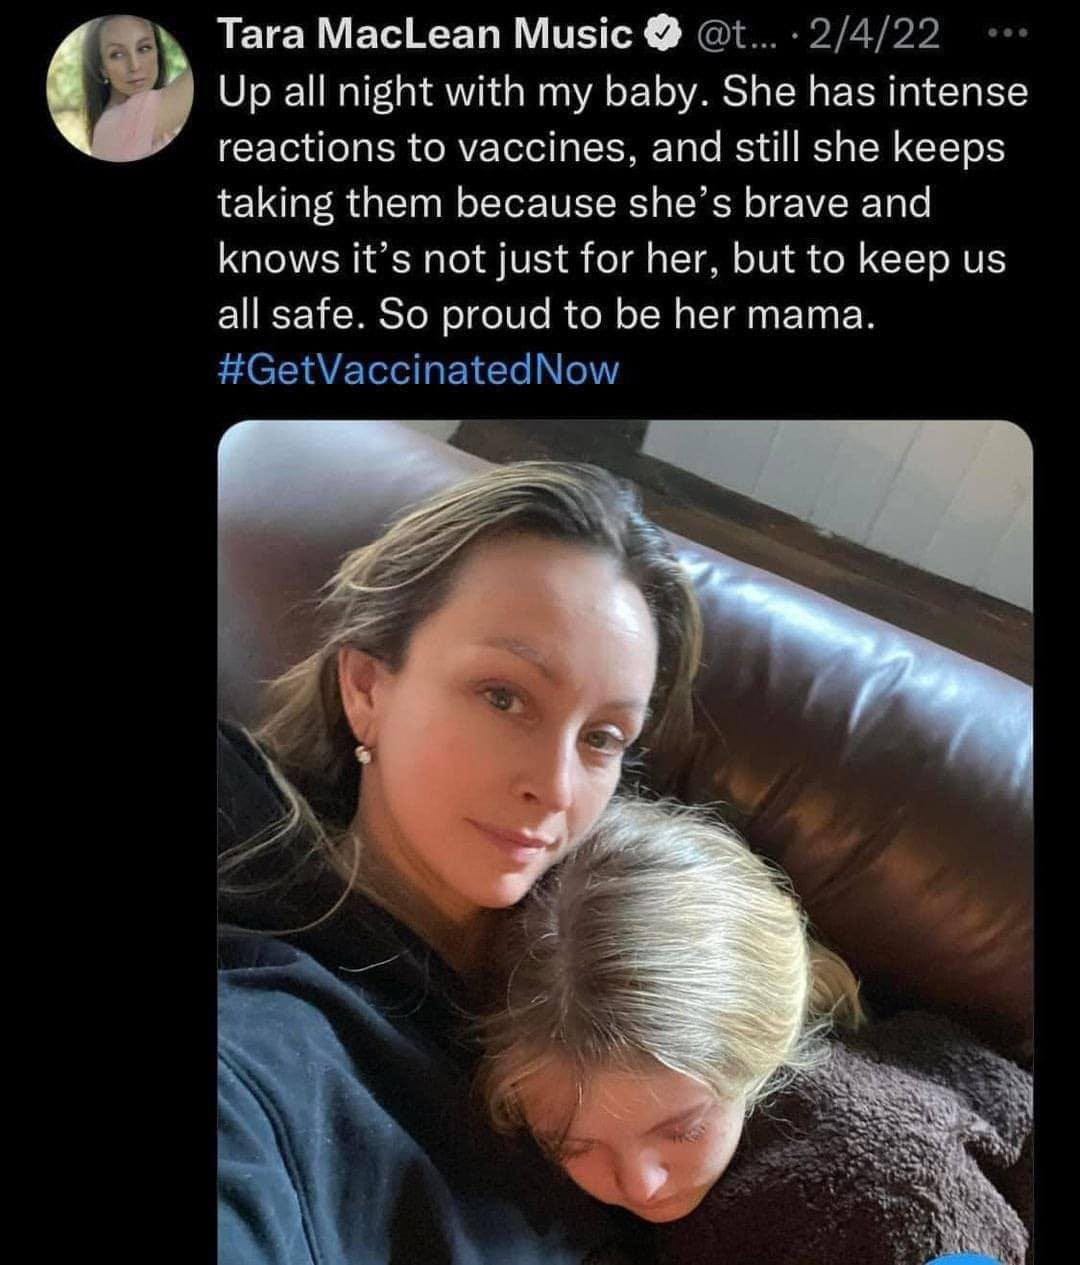 May be an image of 1 person, child and text that says 'Tara MacLean Music 2/4/22 Up all night with my baby. She has intense reactions to vaccines, and still she keeps taking them because she' S brave and knows it' S not just for her, but to keep us all safe. So proud to be her mama. #GetVaccinatedNow'